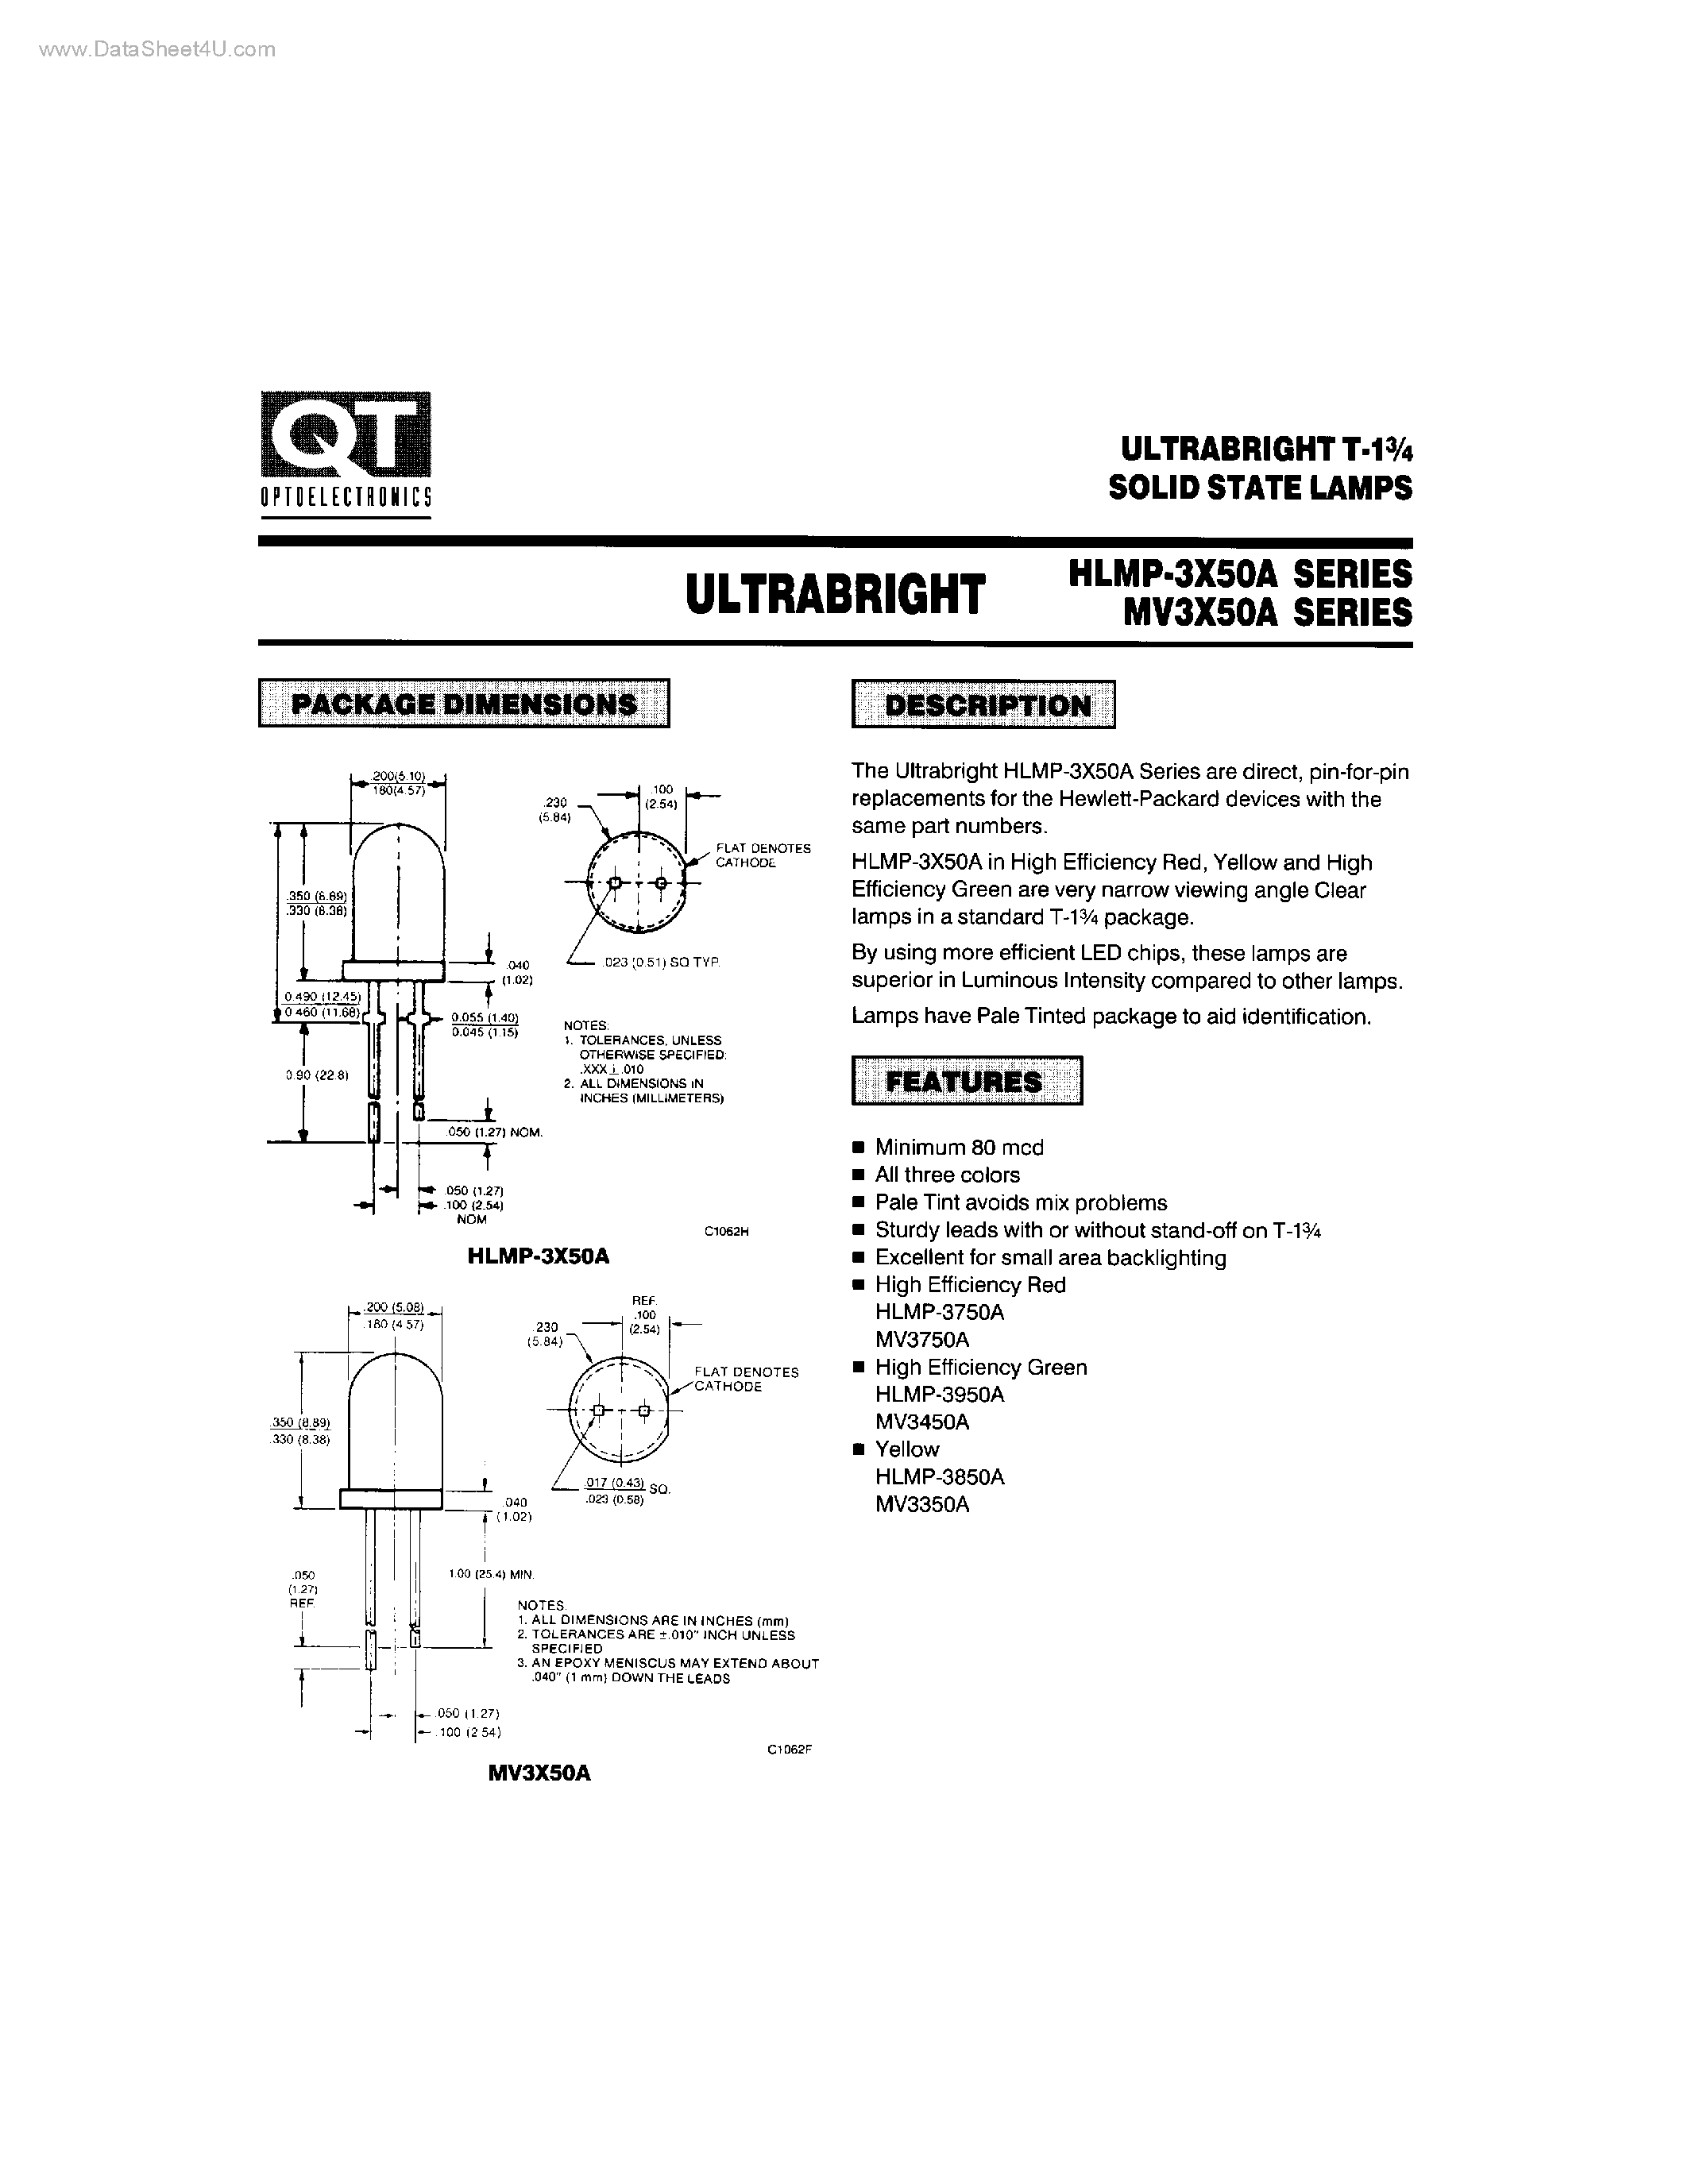 Datasheet MV3450A - ULTRABRIGHT T-1 3/4 SOLID STATE LAMPS page 1